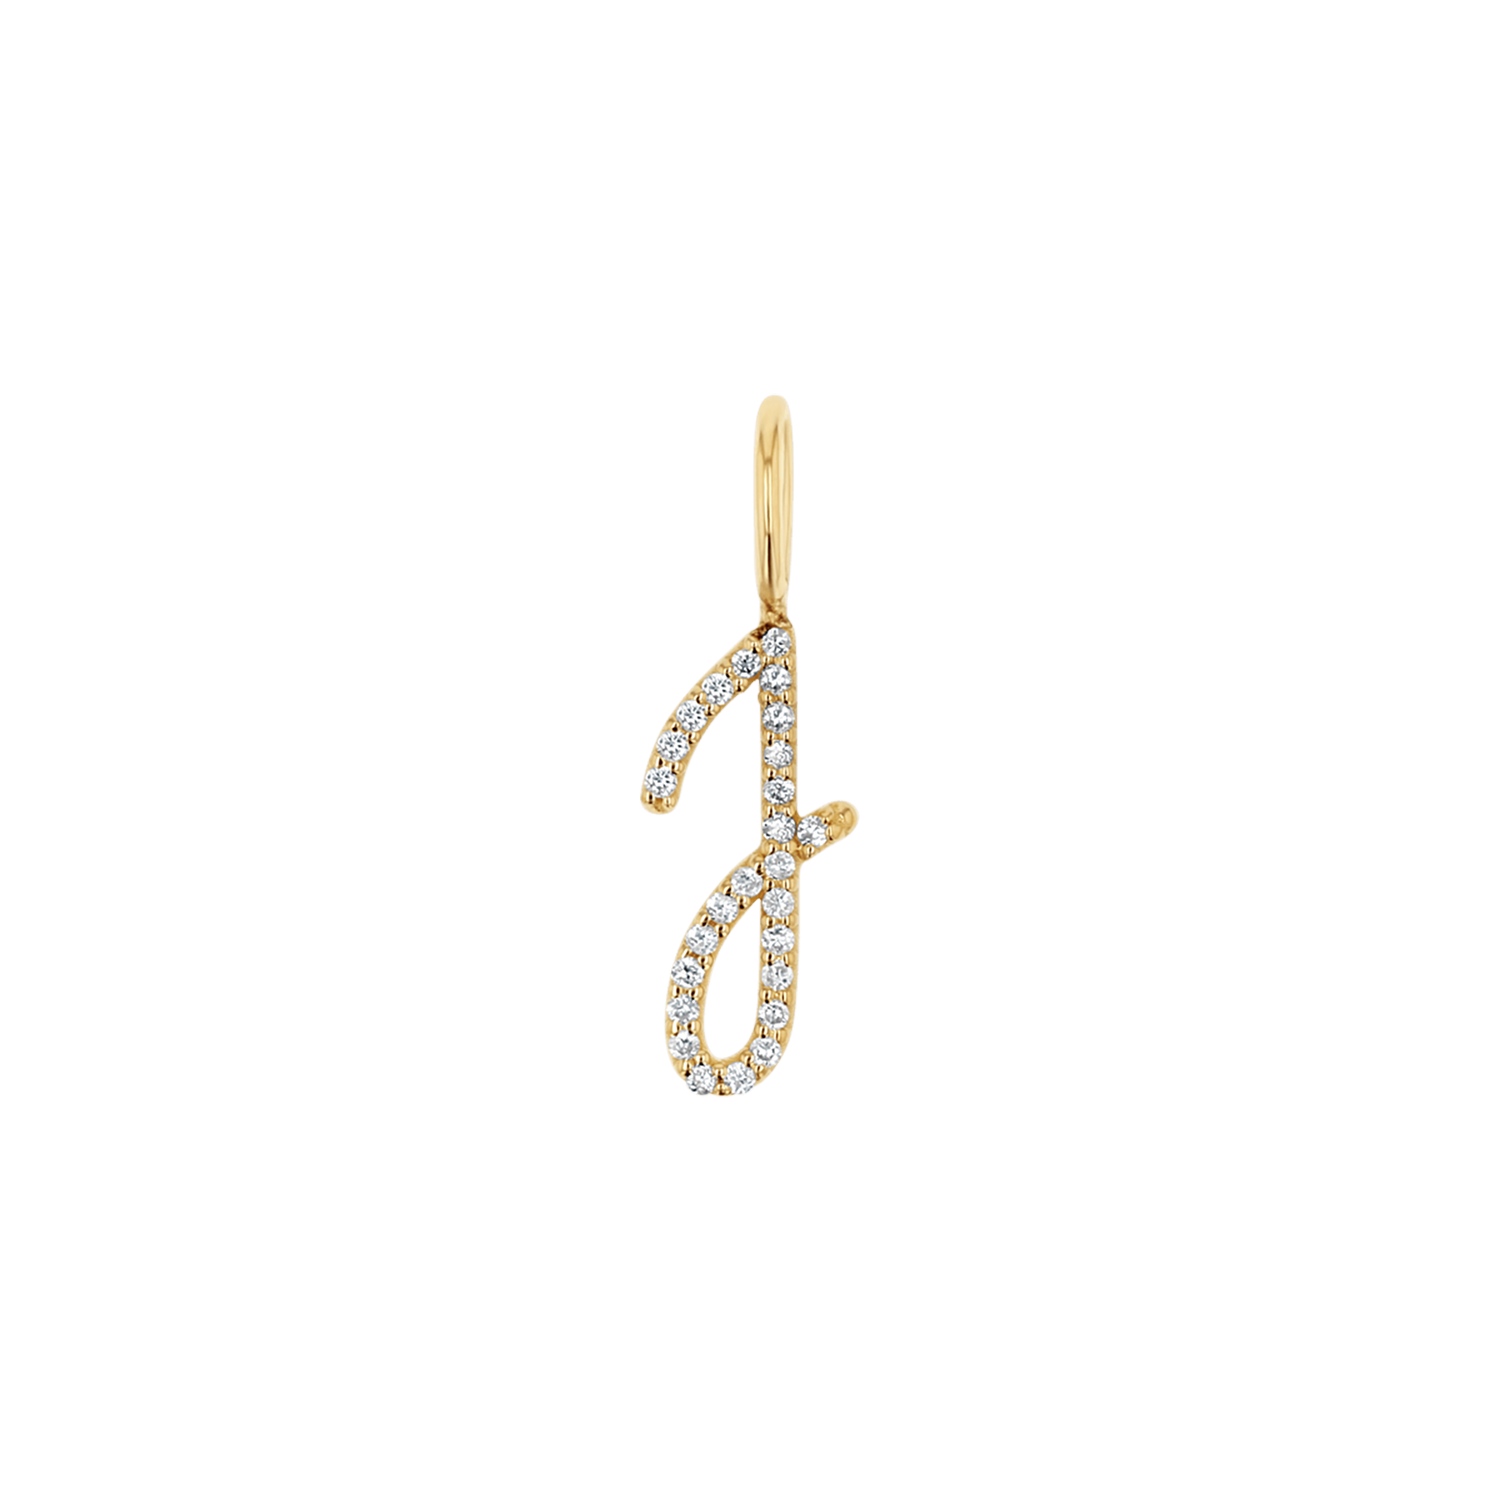 initials Here Alphabet Charm - initials Charms J / 14kt Gold